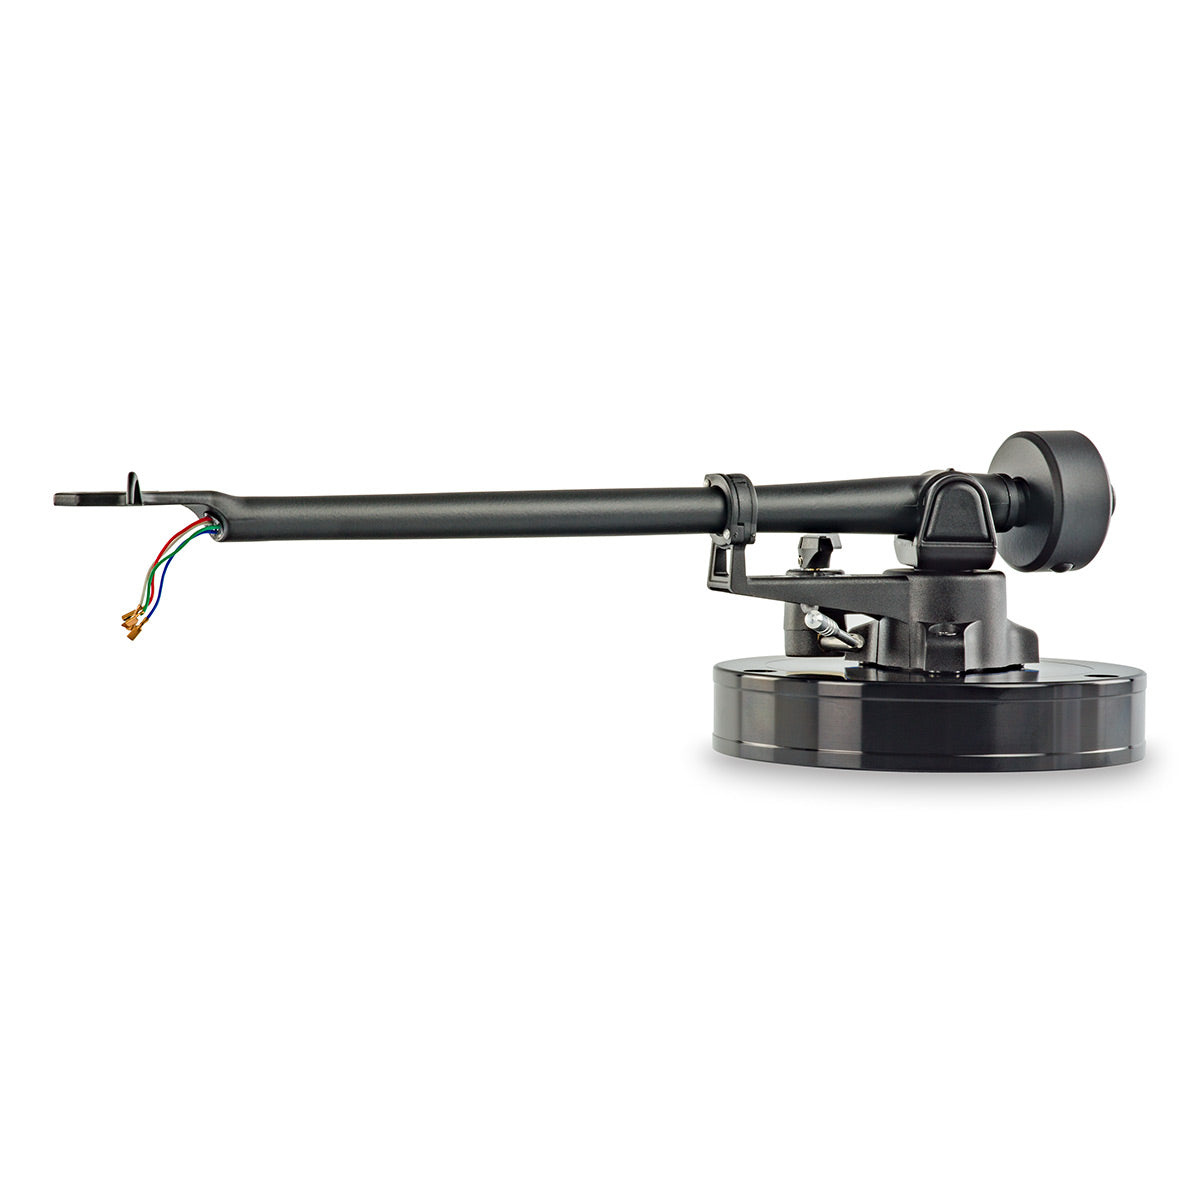 Michell TecnoDec Turntable Bundle with T2 Tonearm and UniCover